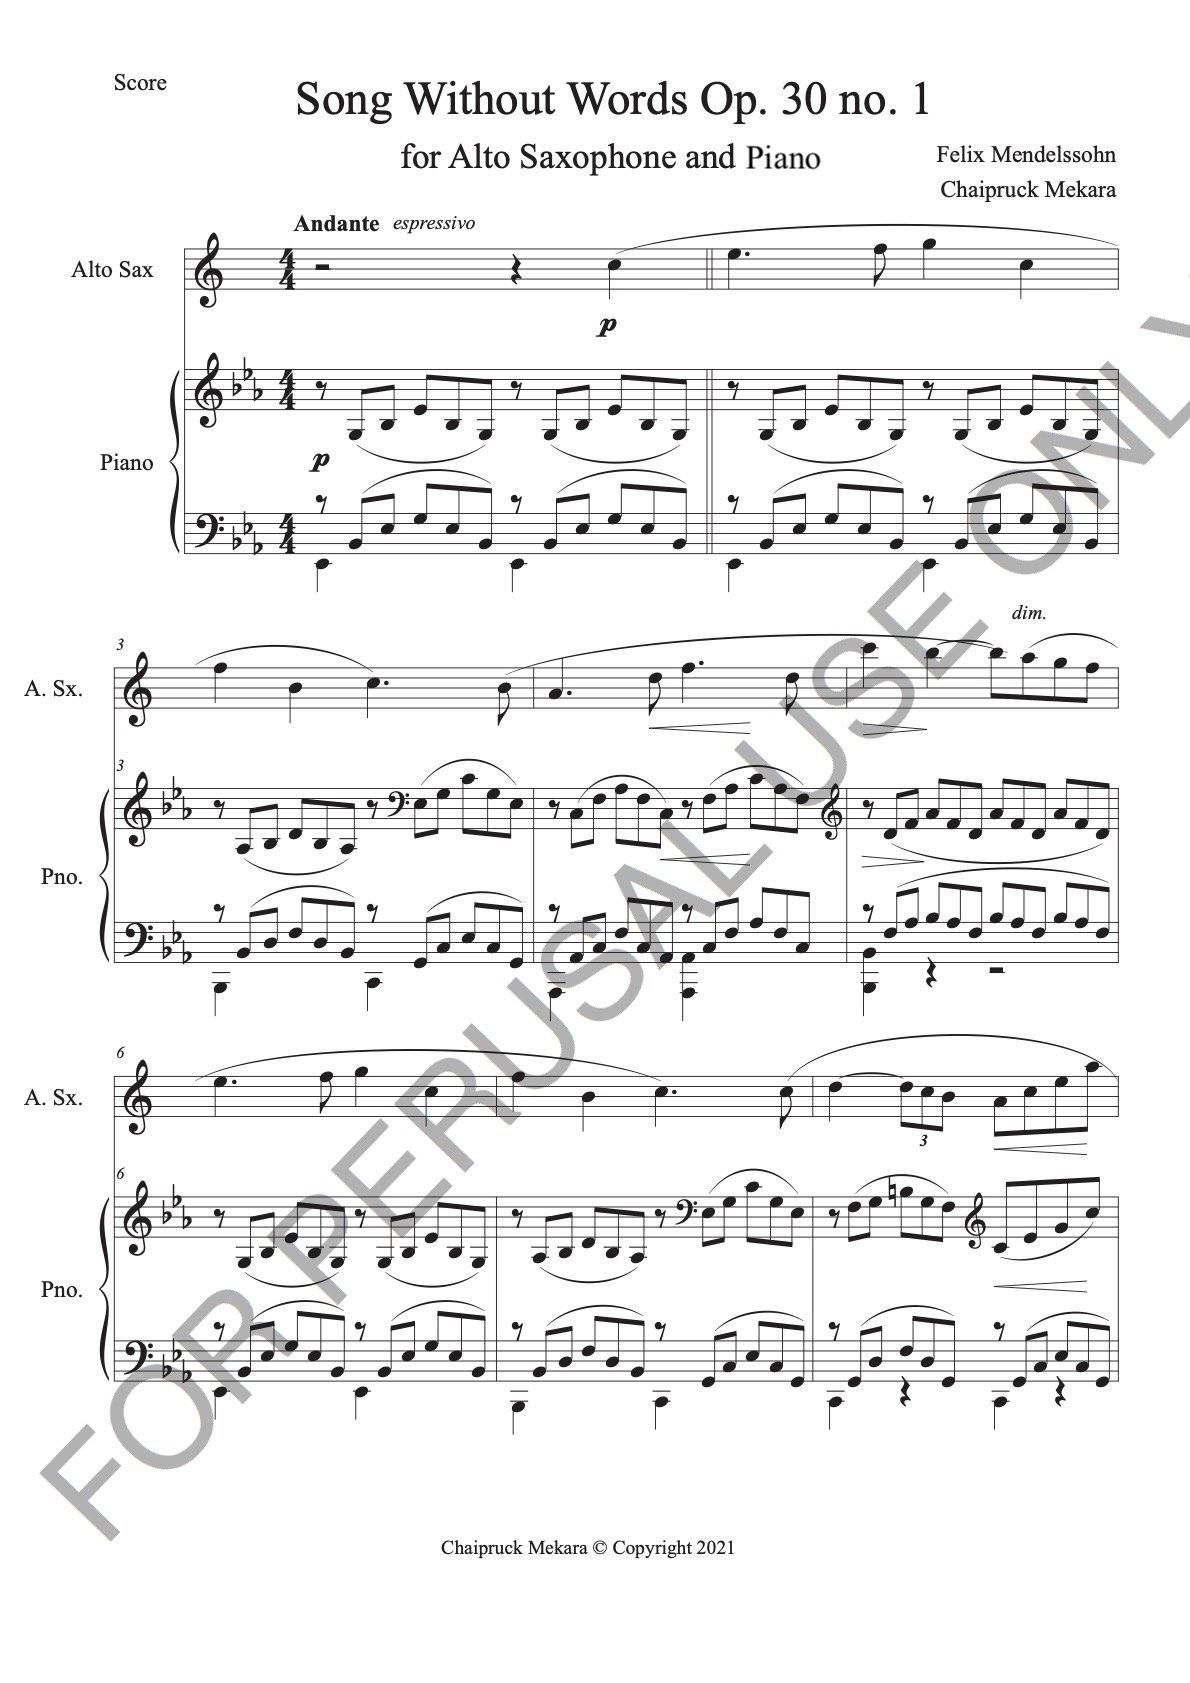 Alto Sax and Piano: Song Without Words op. 30 no. 1 - ChaipruckMekara